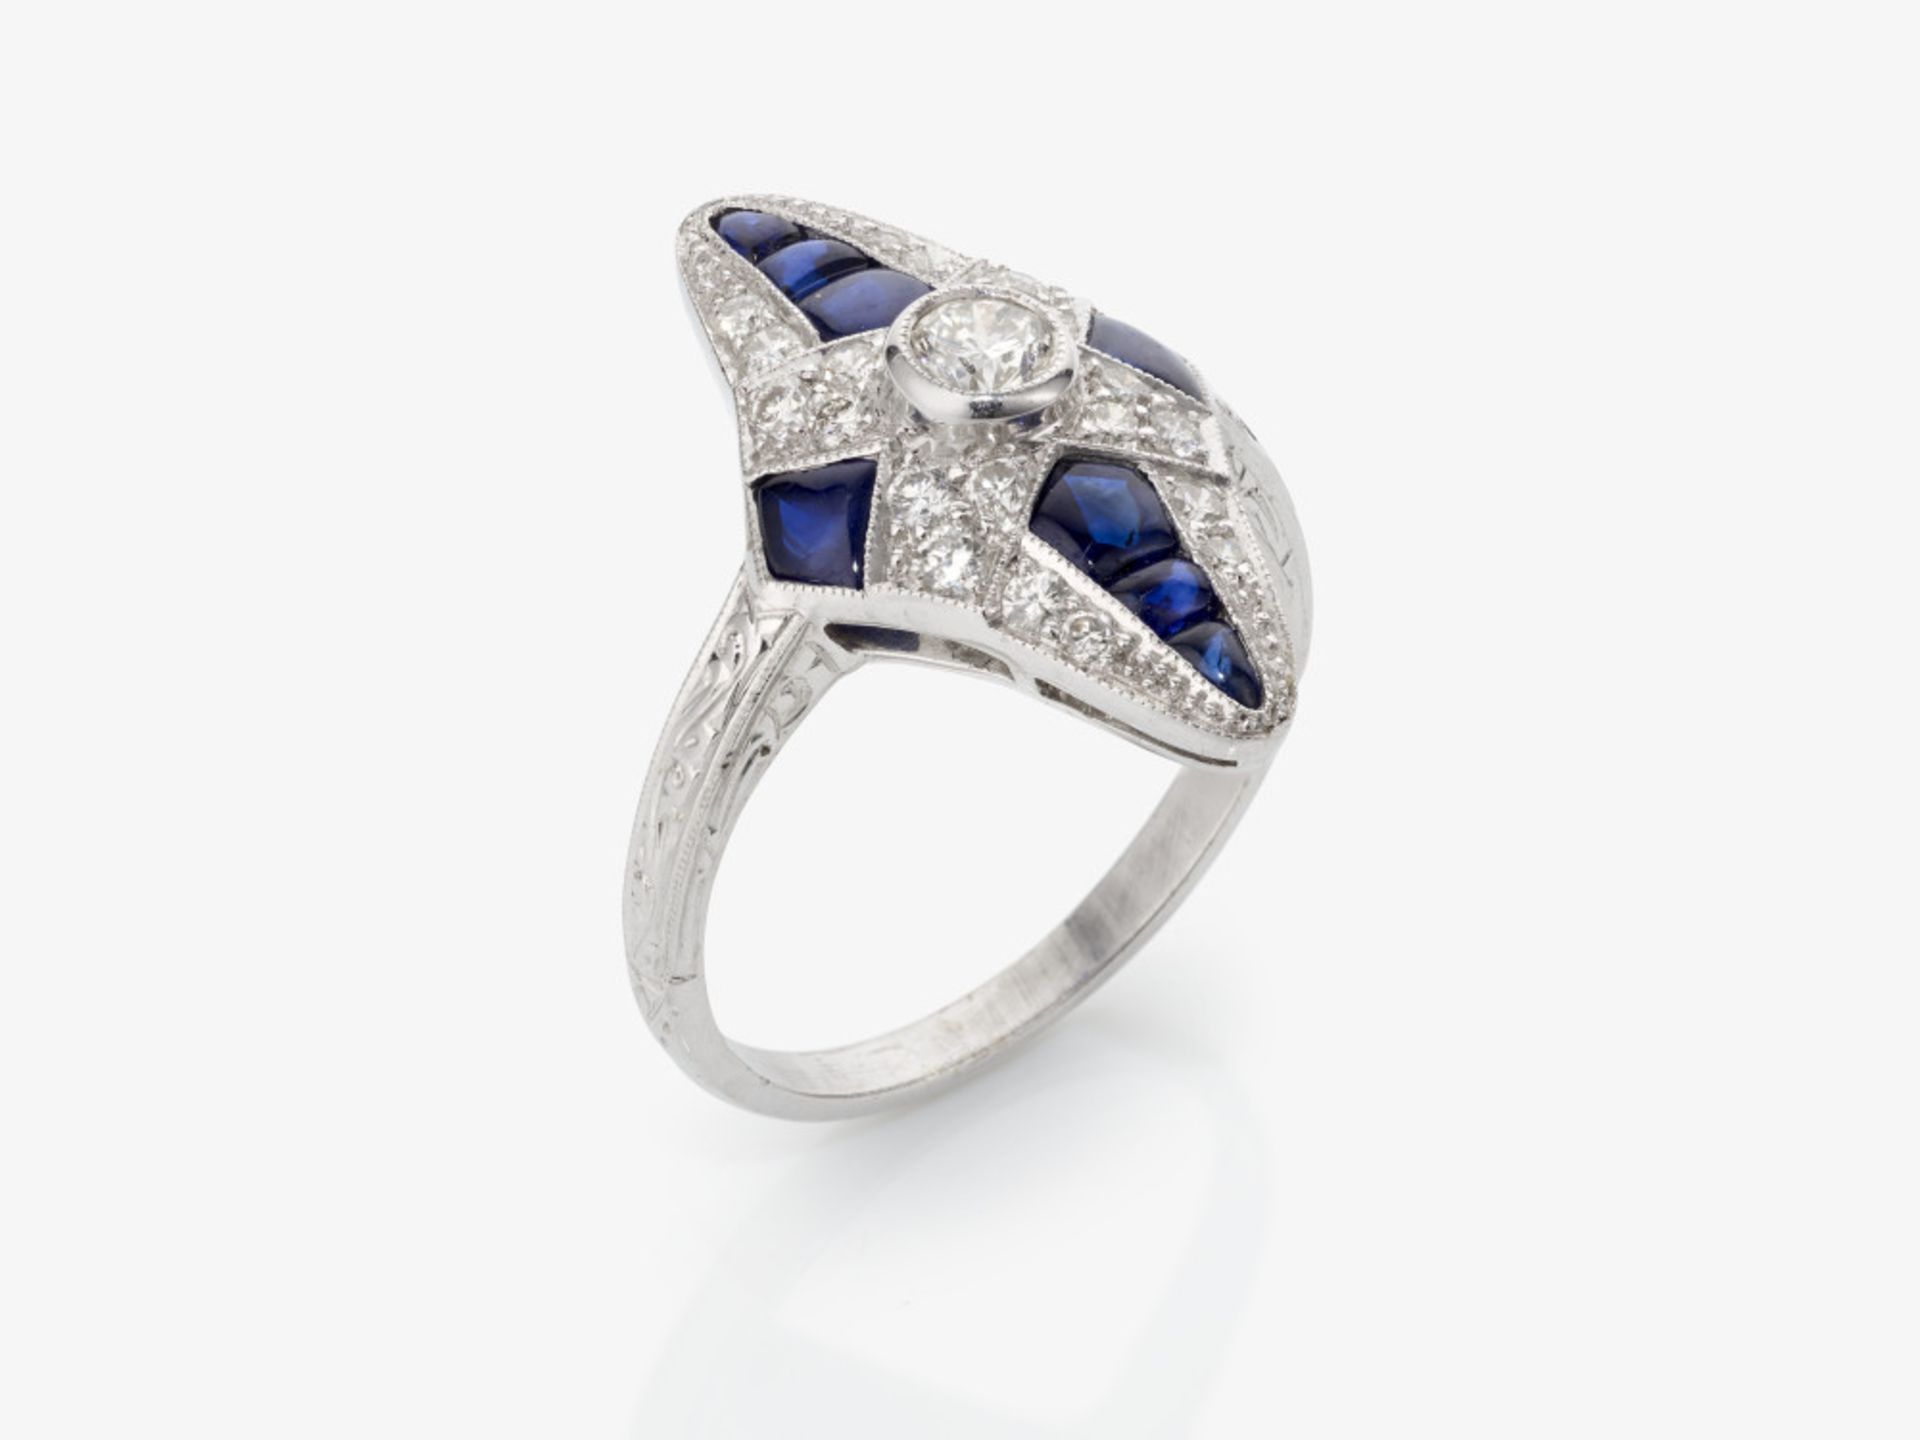 A historical marquise ring decorated with sapphires and brilliant cut diamonds - Image 2 of 4